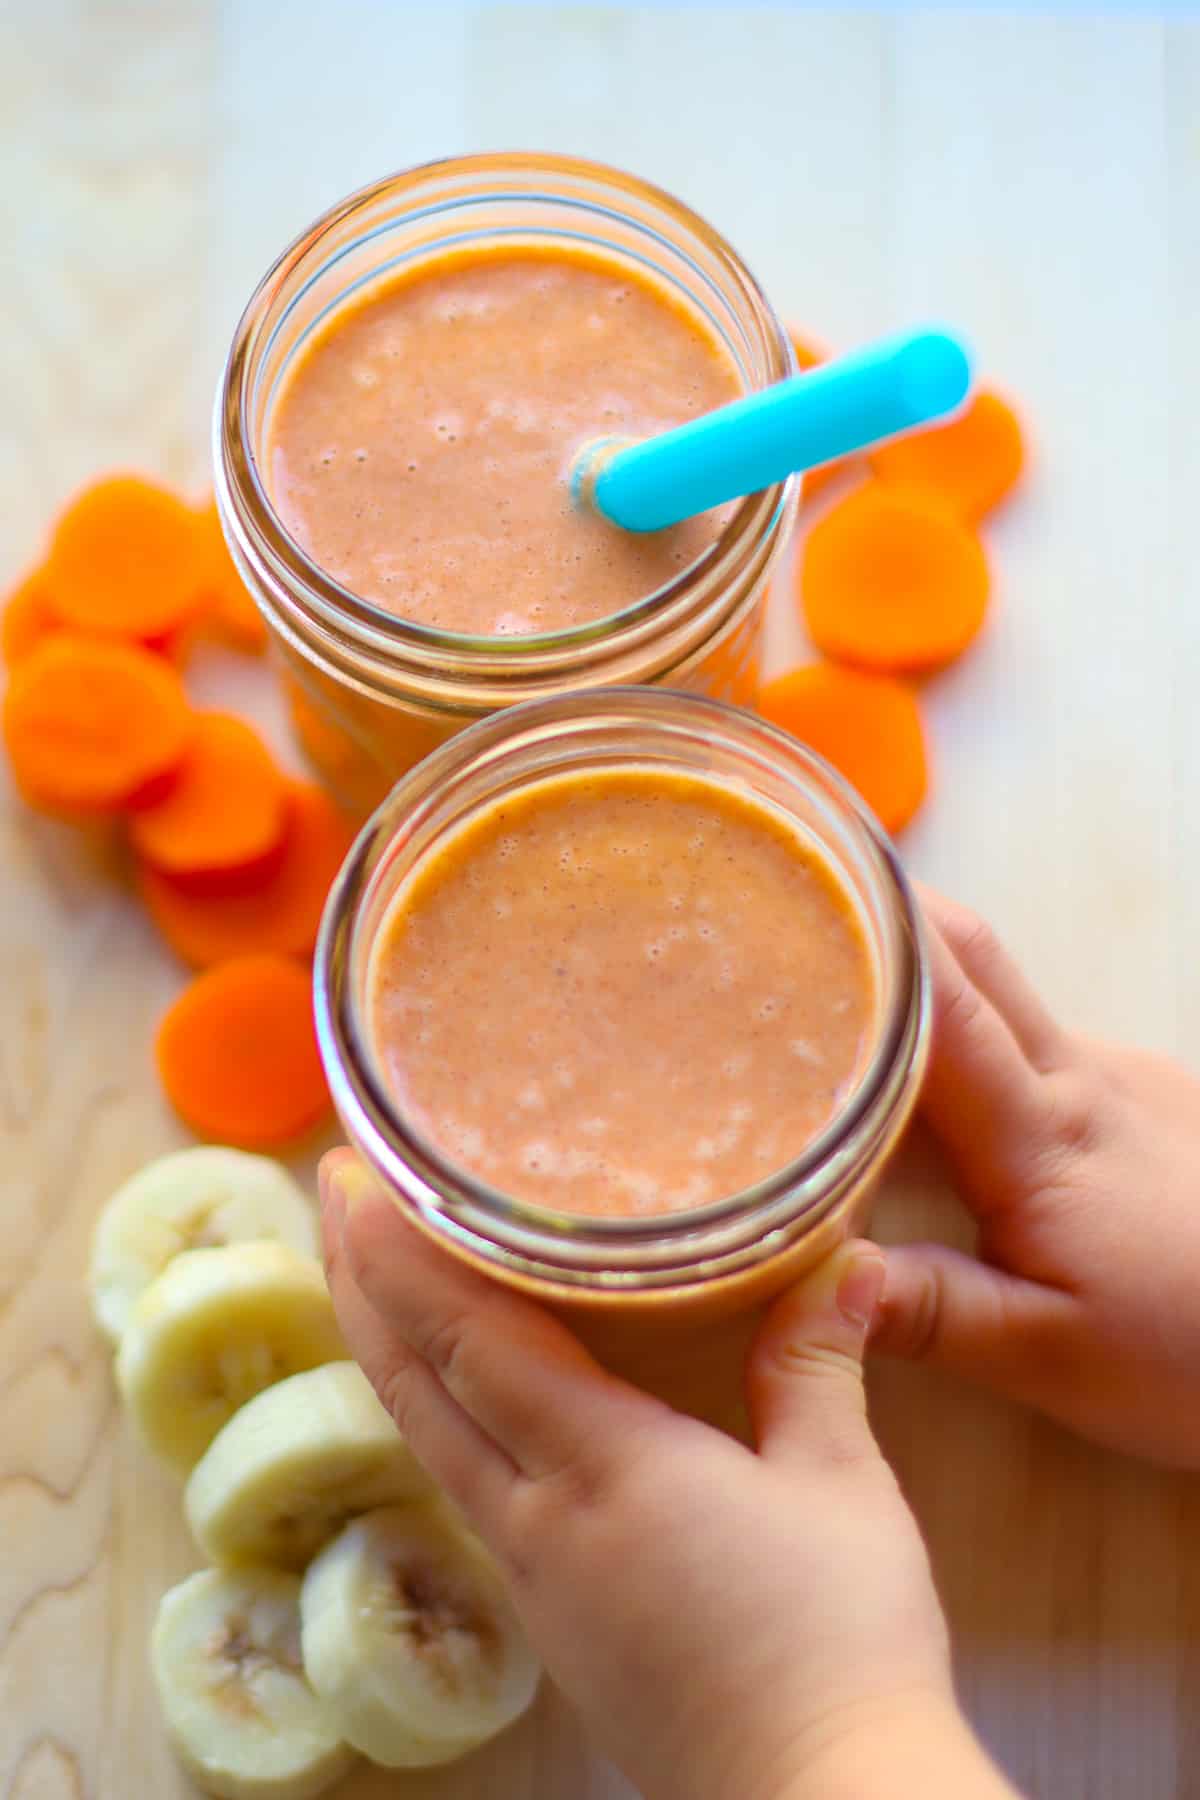 Top view of two smoothies in a mason jar, one with a blue straw, surrounded by slices of carrots and bananas.